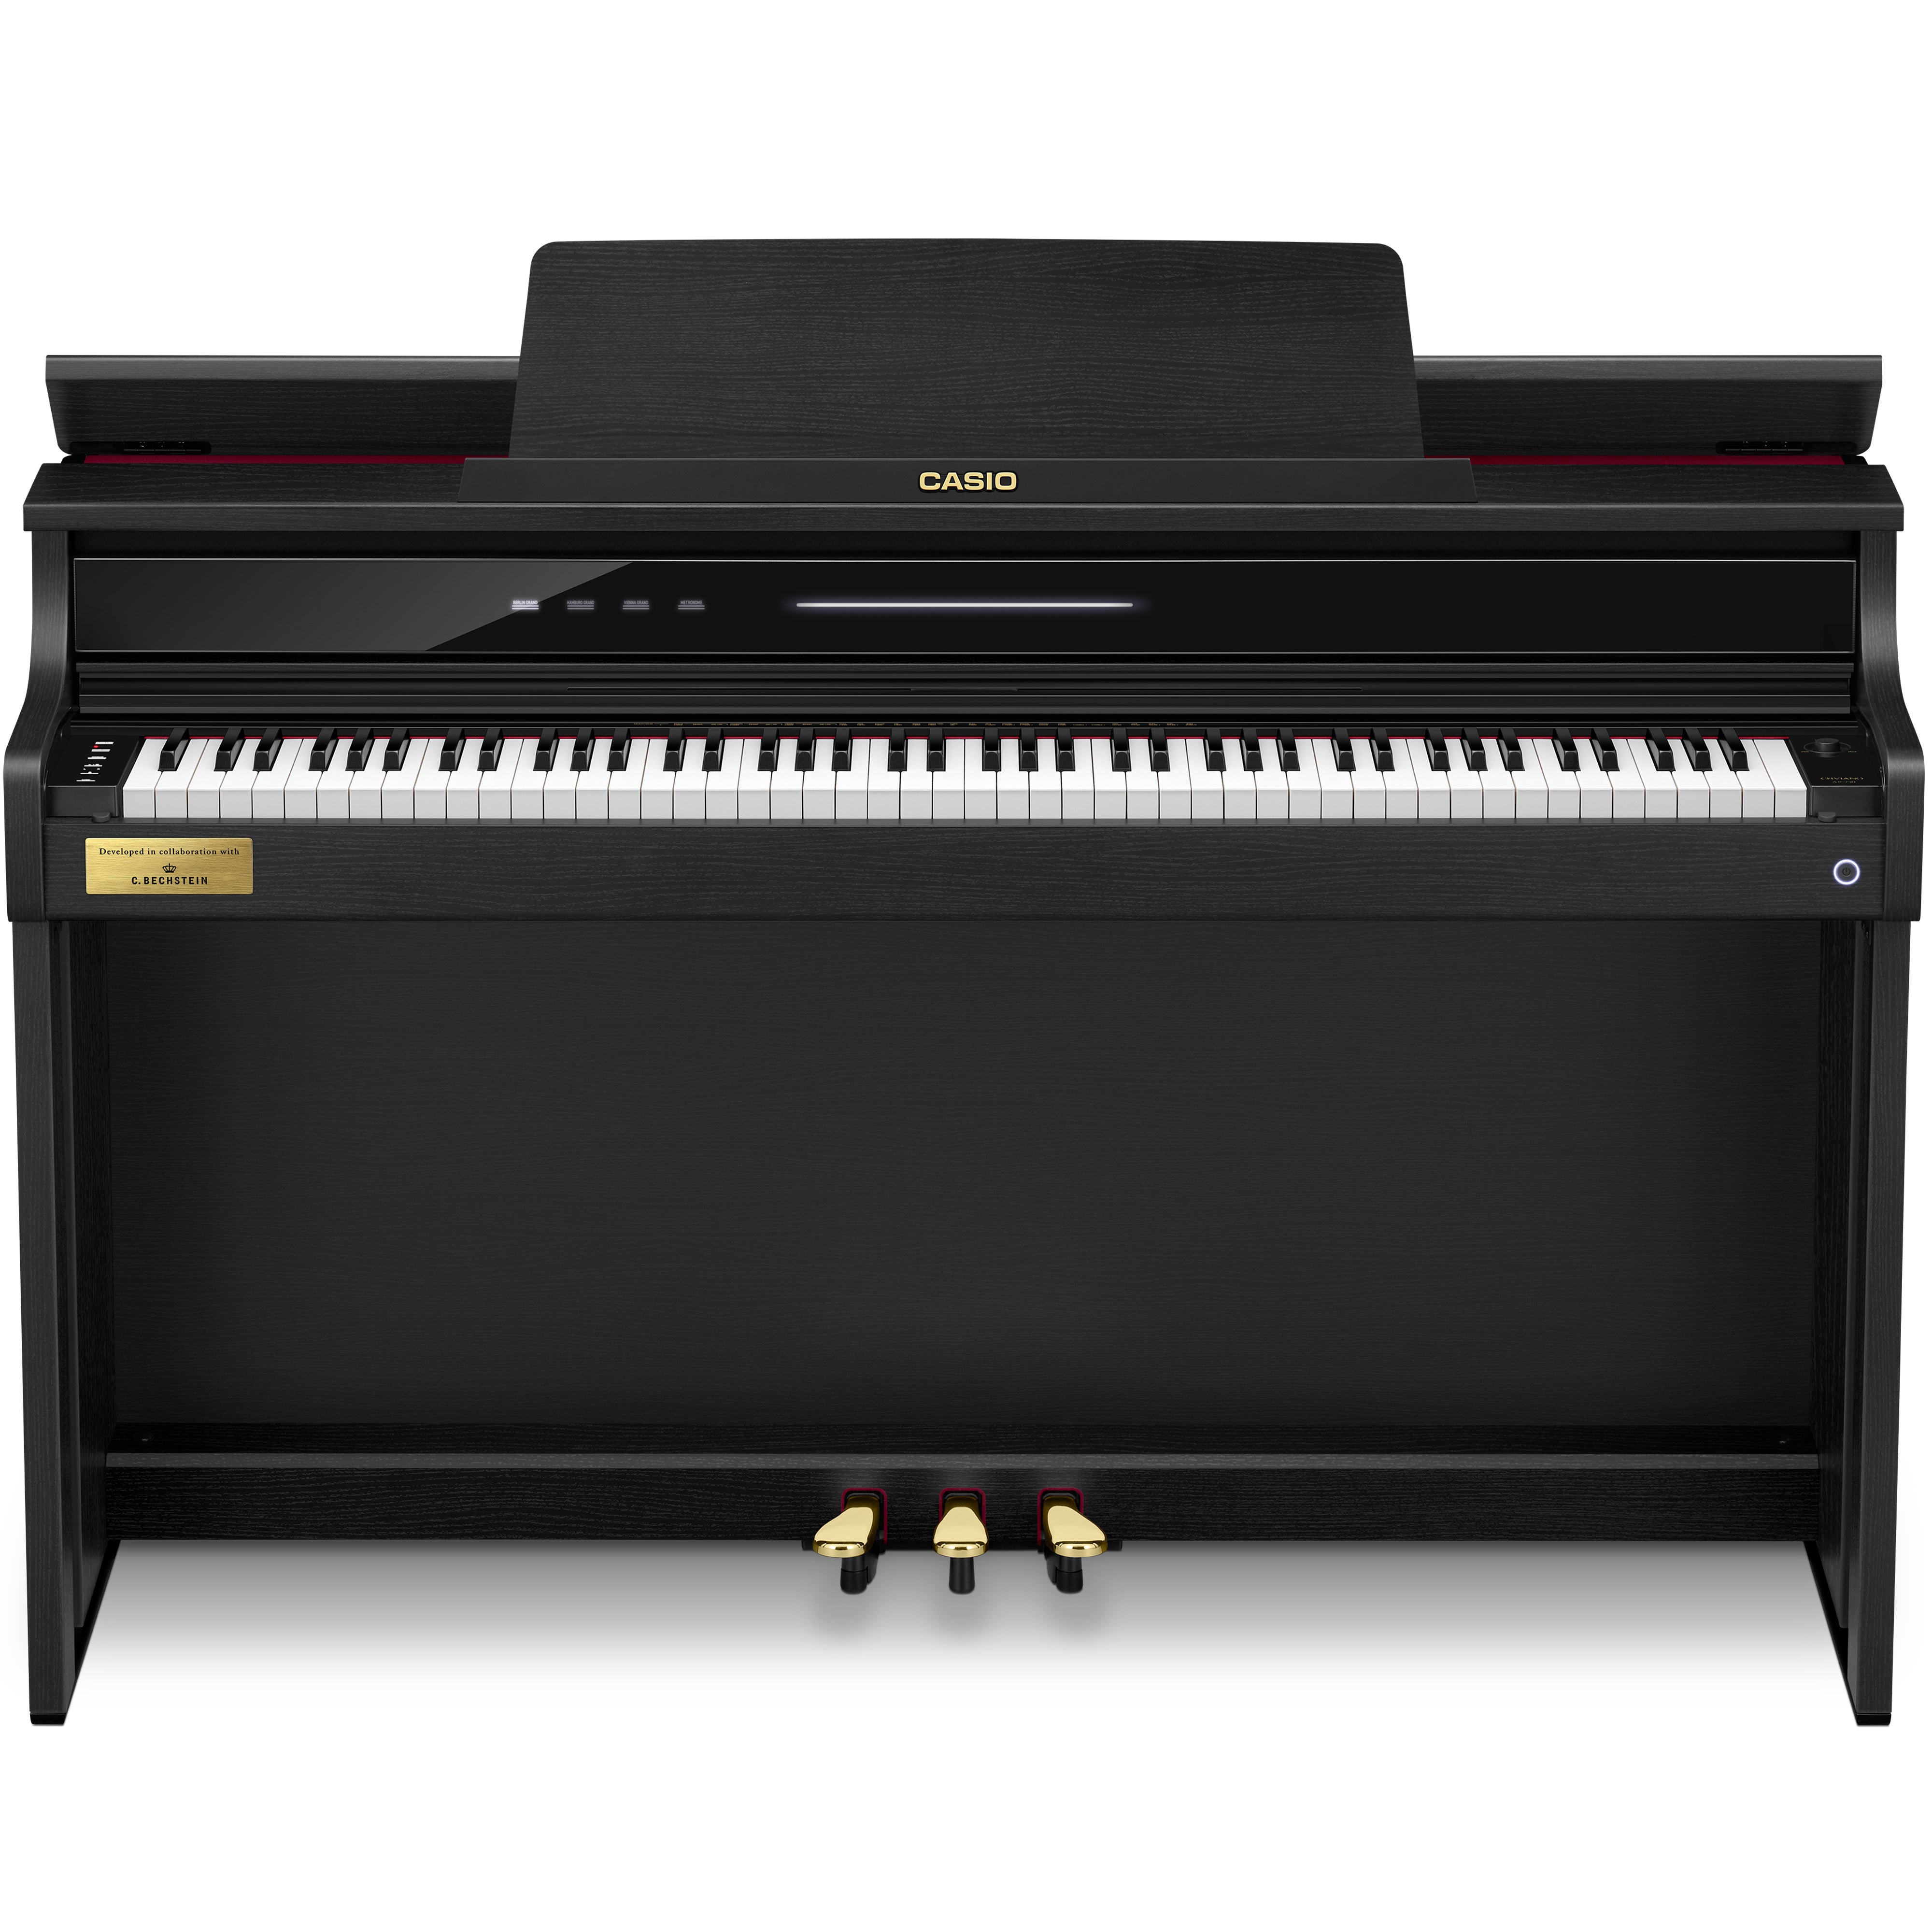 Casio Celviano AP-750 Digital Piano - Black - front view with lid open